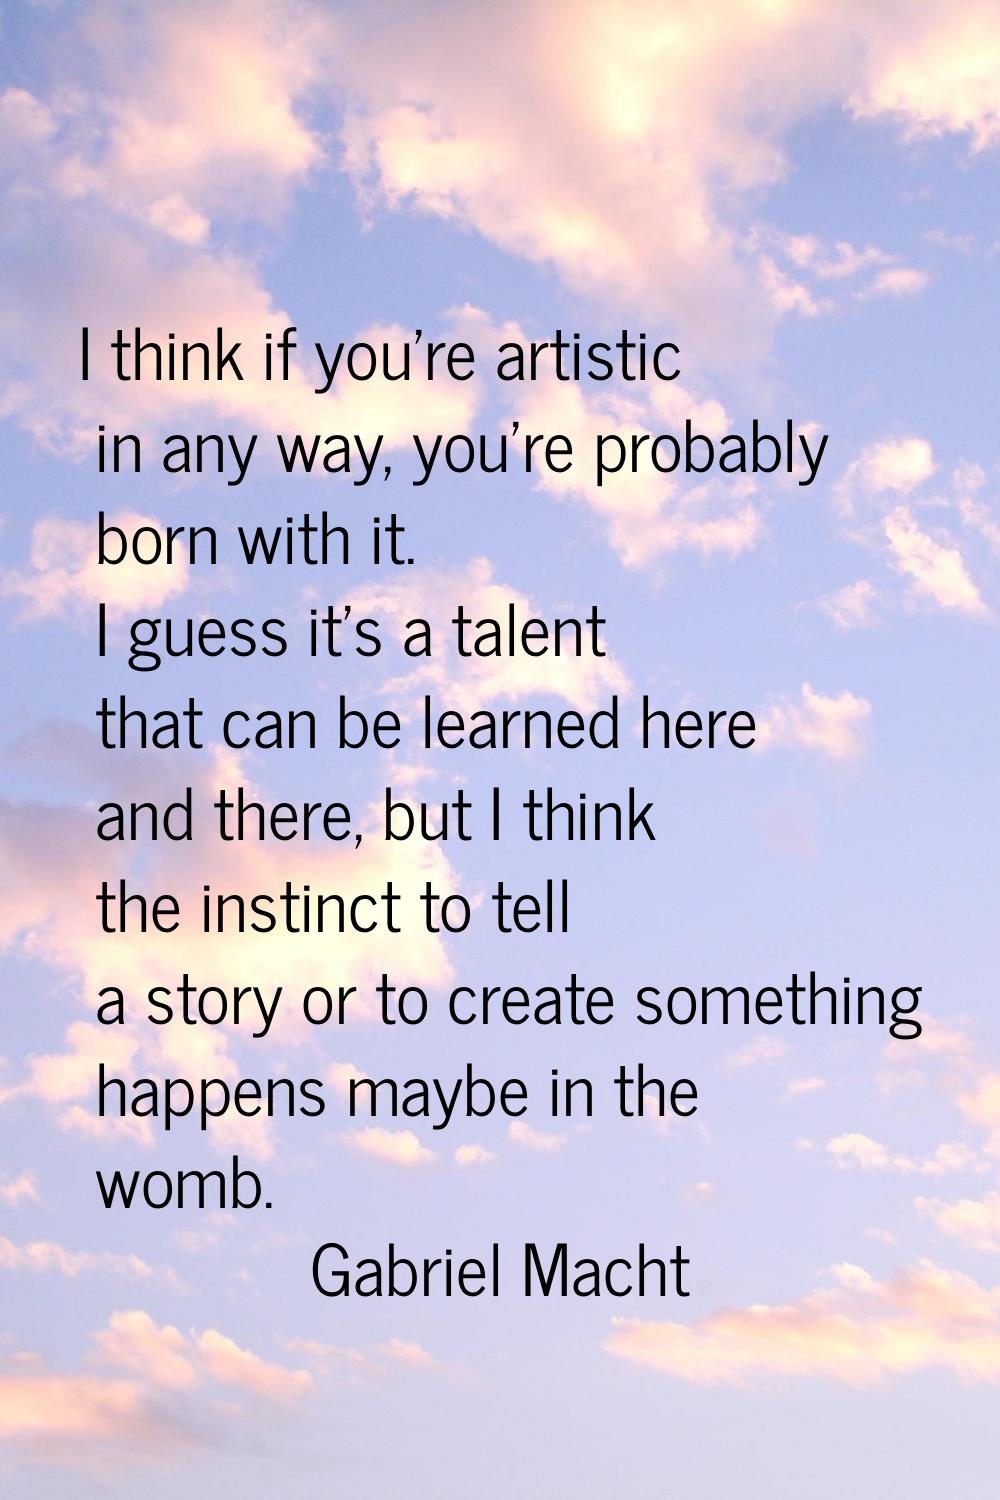 I think if you're artistic in any way, you're probably born with it. I guess it's a talent that can